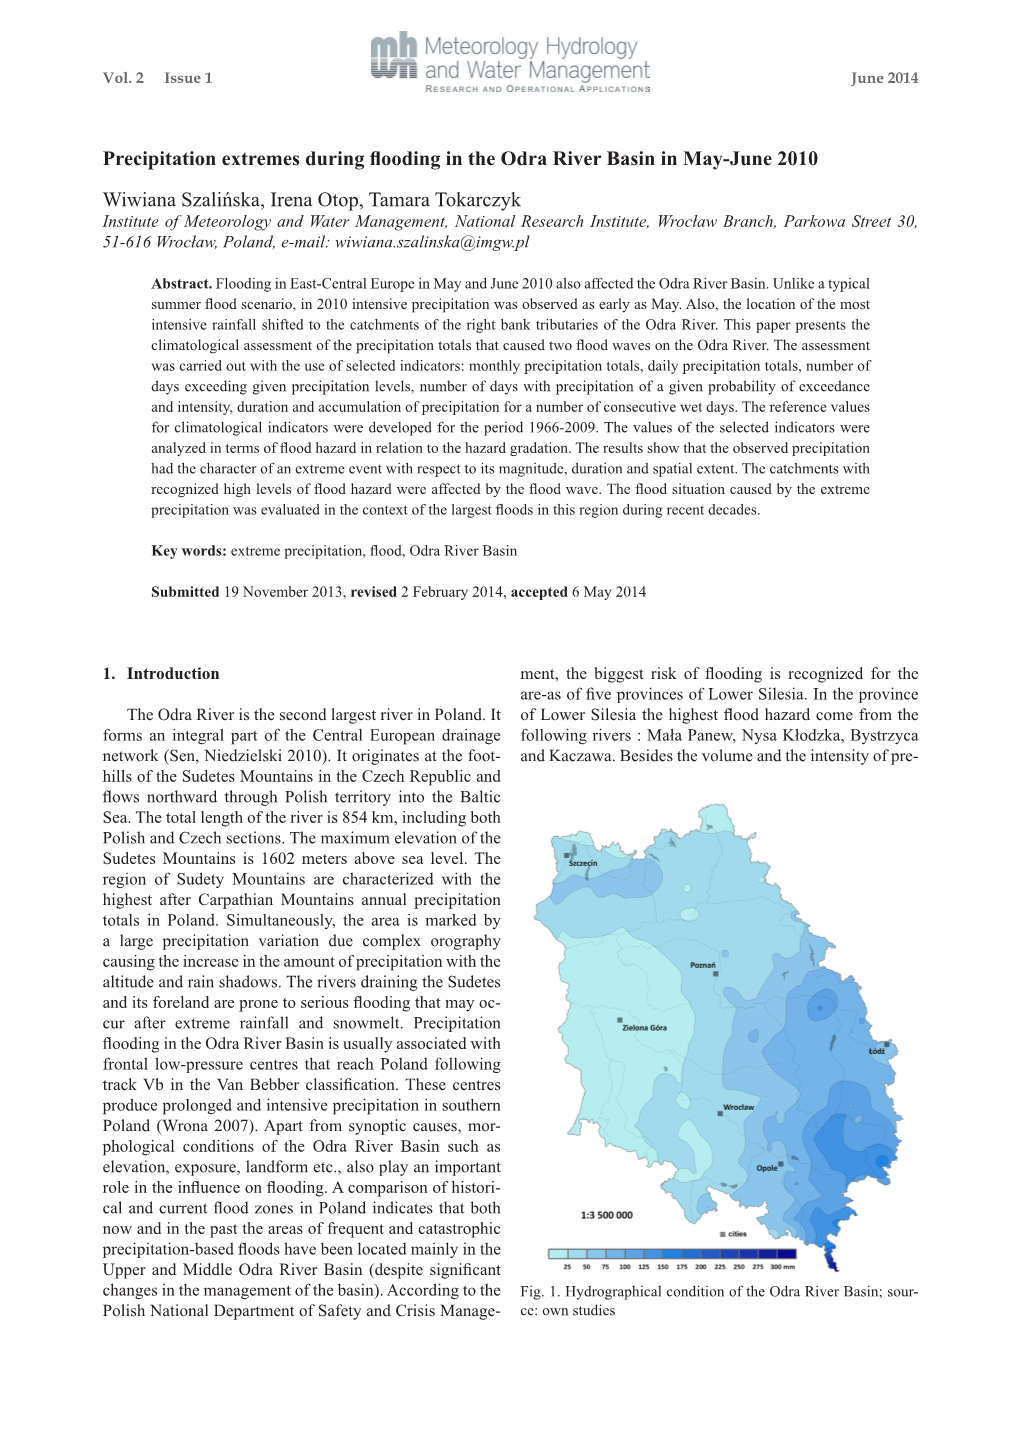 Precipitation Extremes During Flooding in the Odra River Basin in May